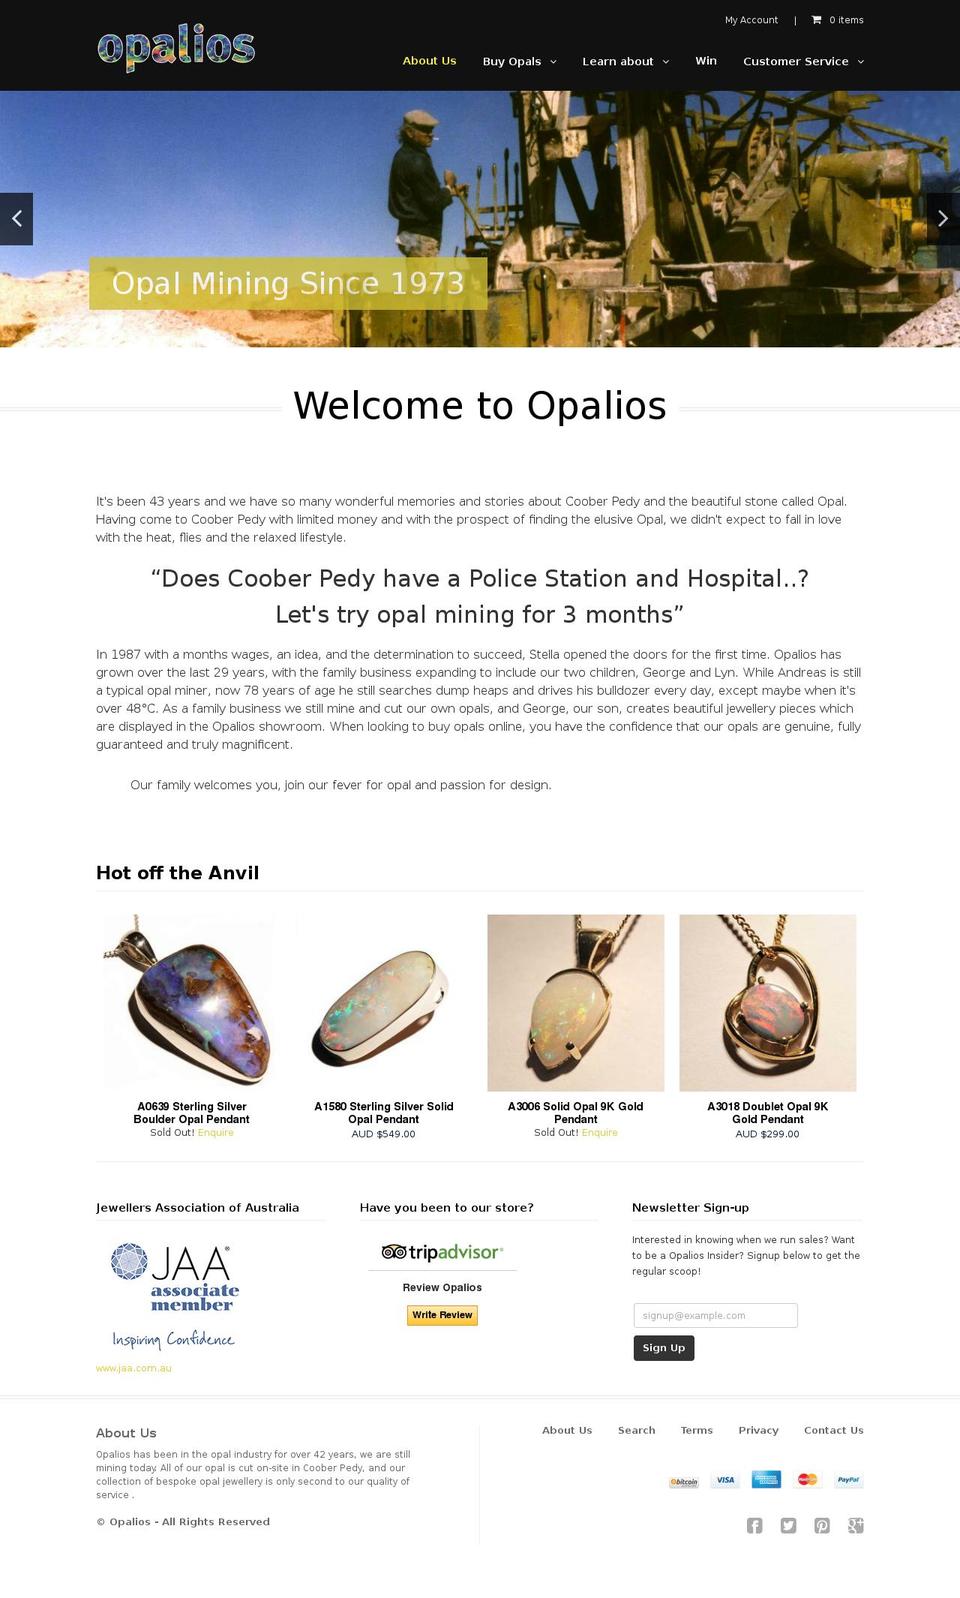 limitless Shopify theme site example opalios.com